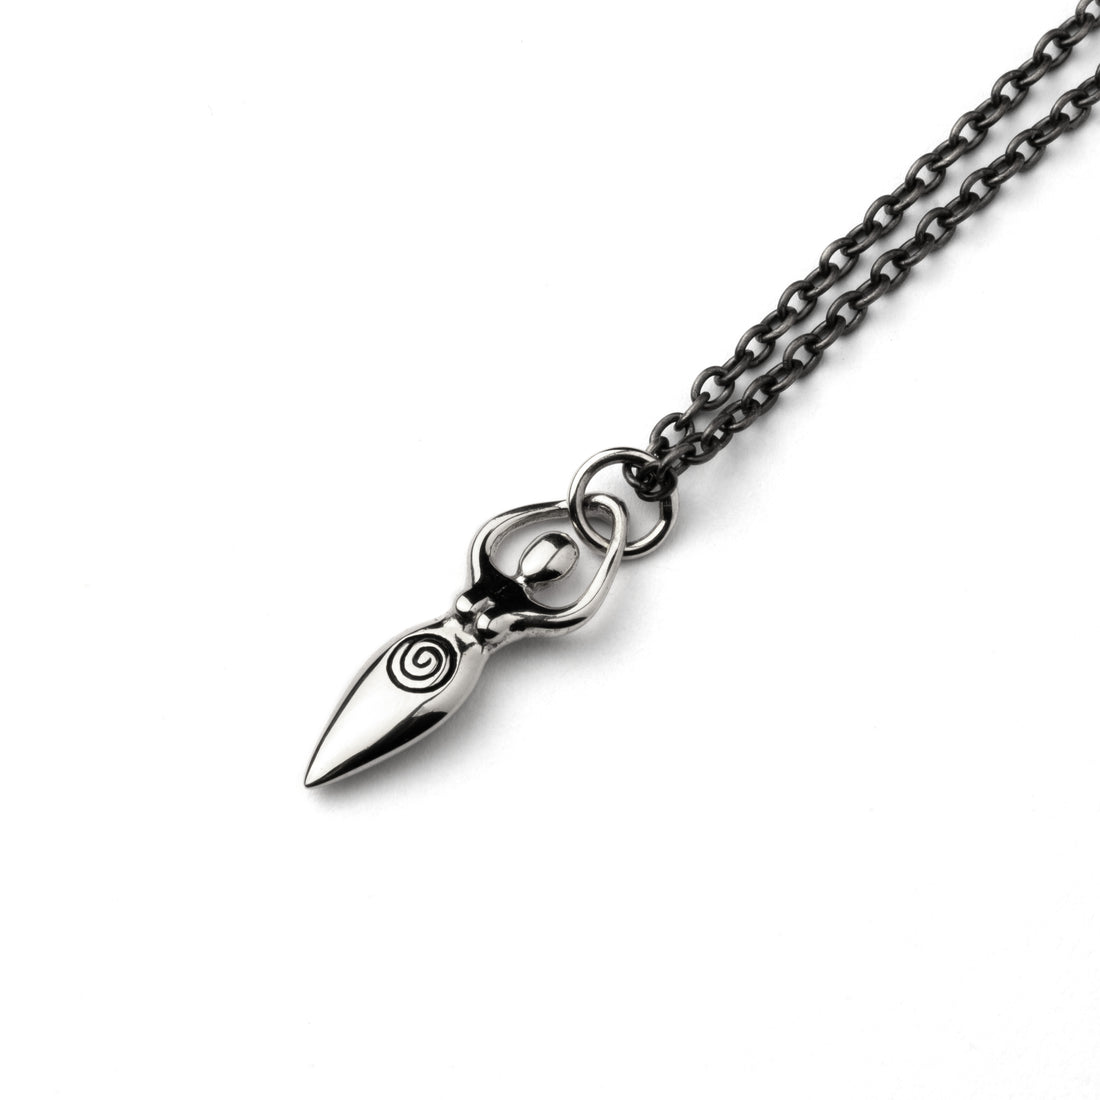 Tiny silver Fertility goddess with etched spiral charm on a necklace right side view